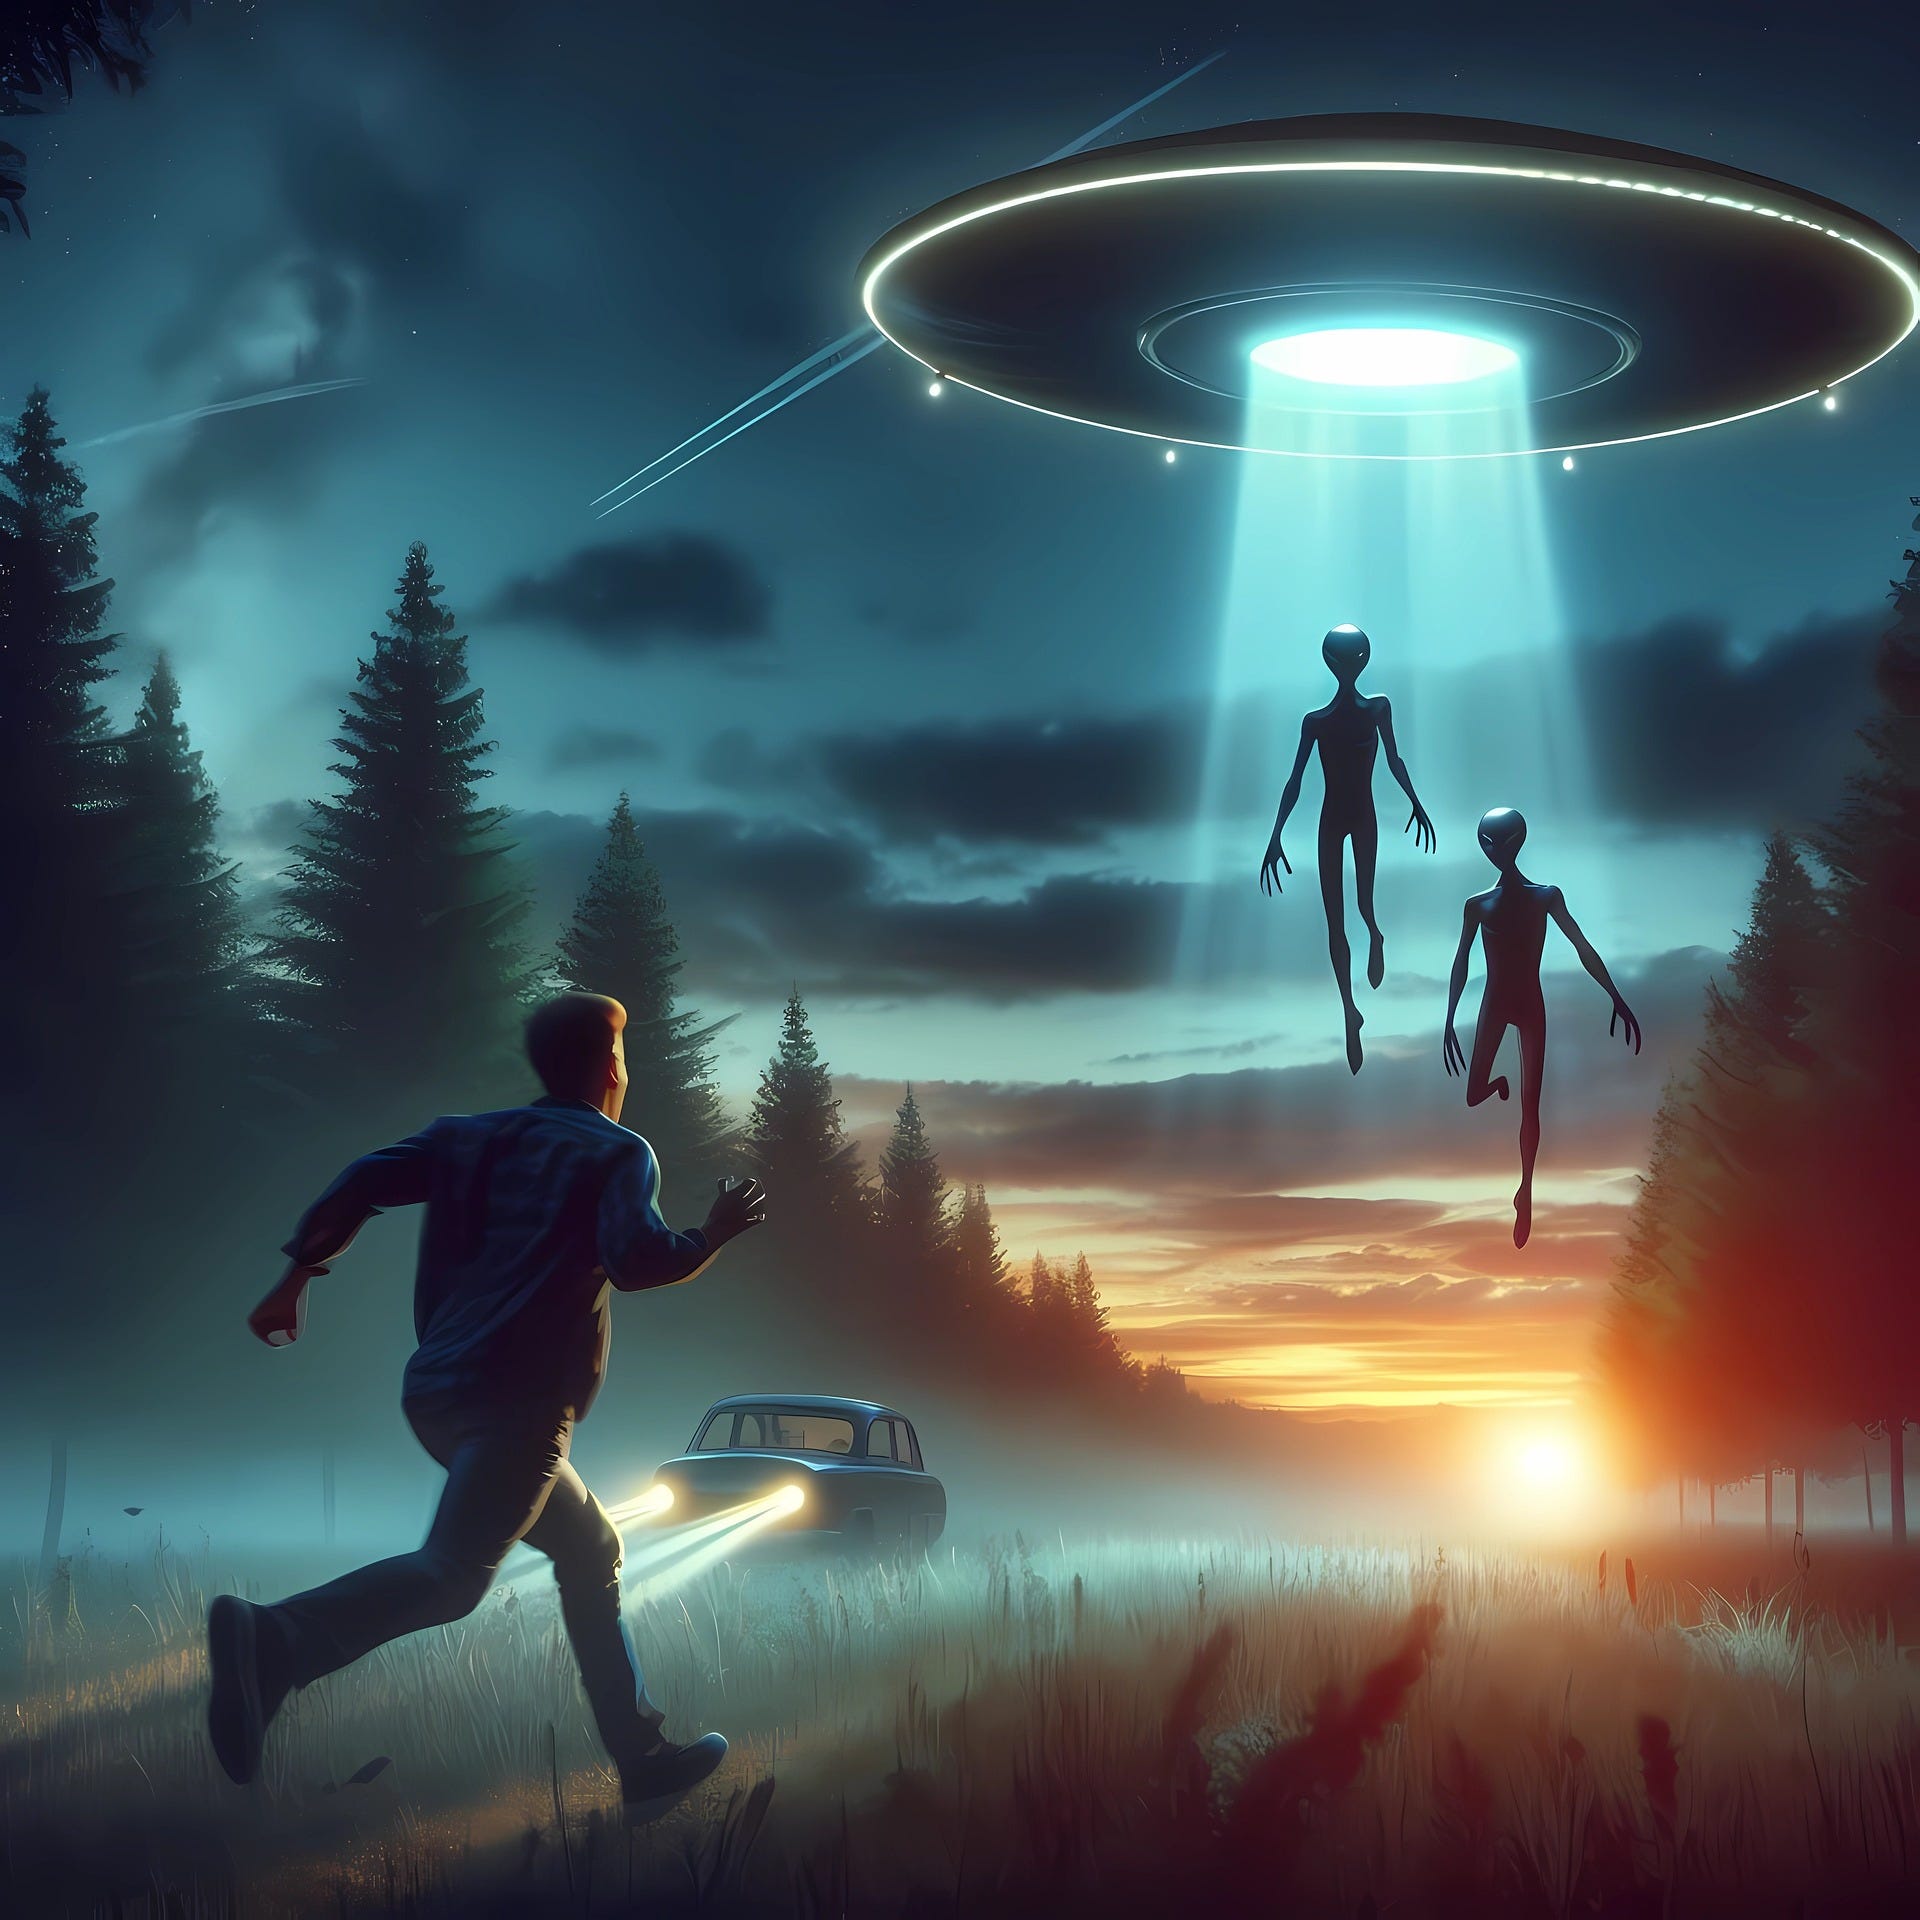 Unconventional Theories on UFOs